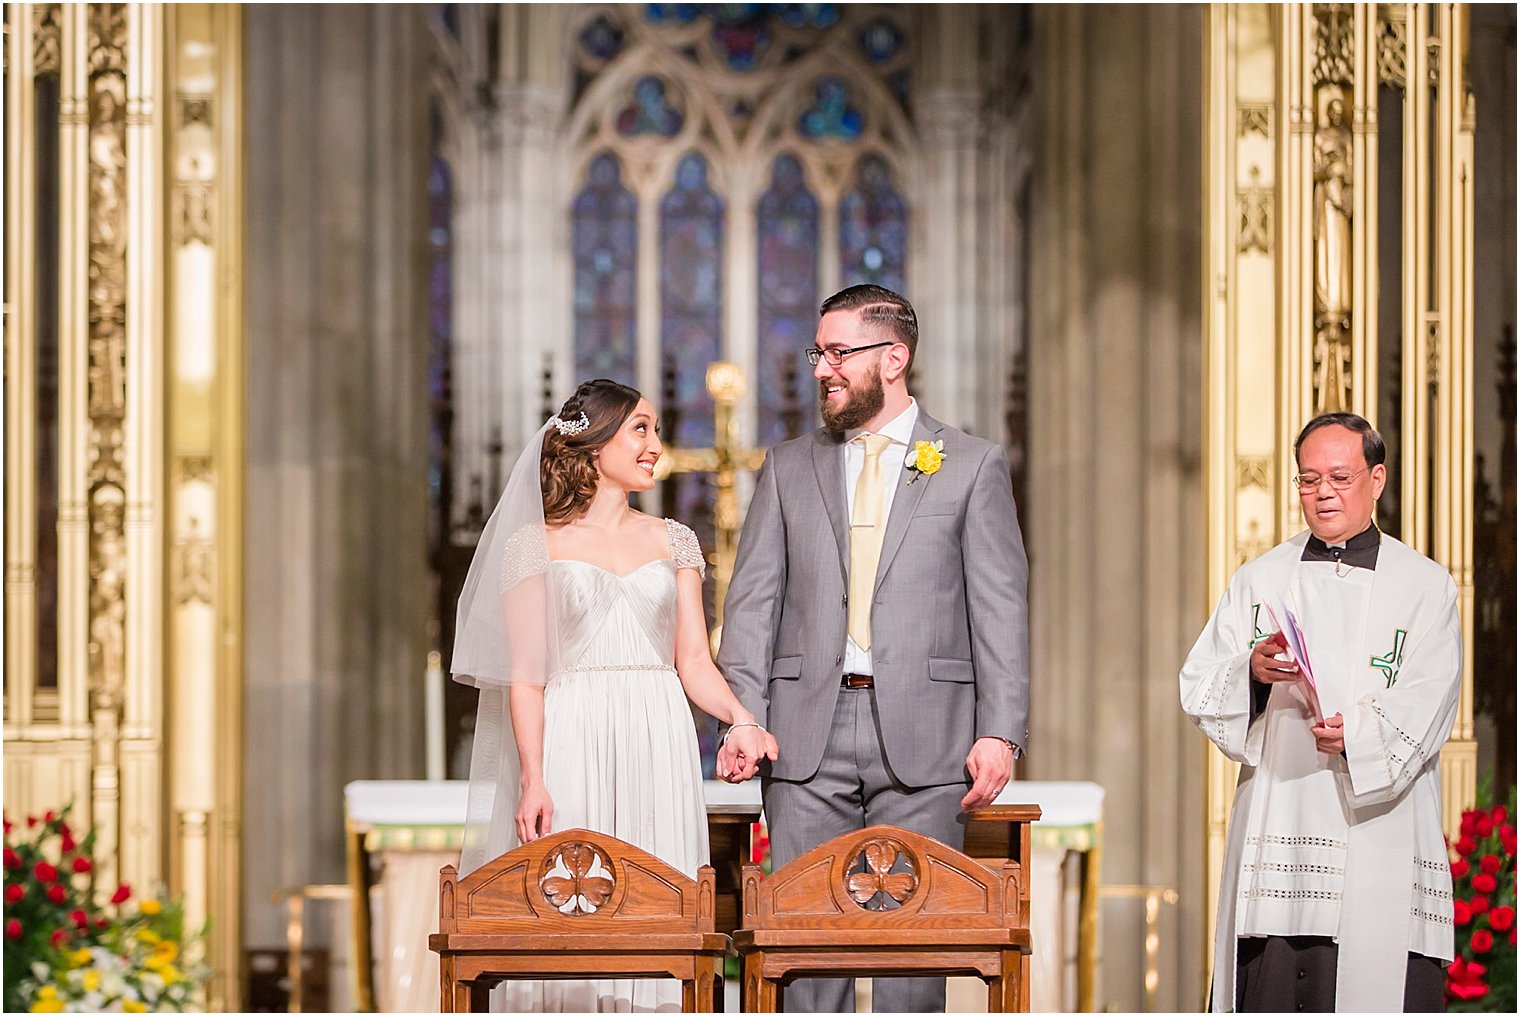 Wedding Ceremony at St. Patrick's Cathedral